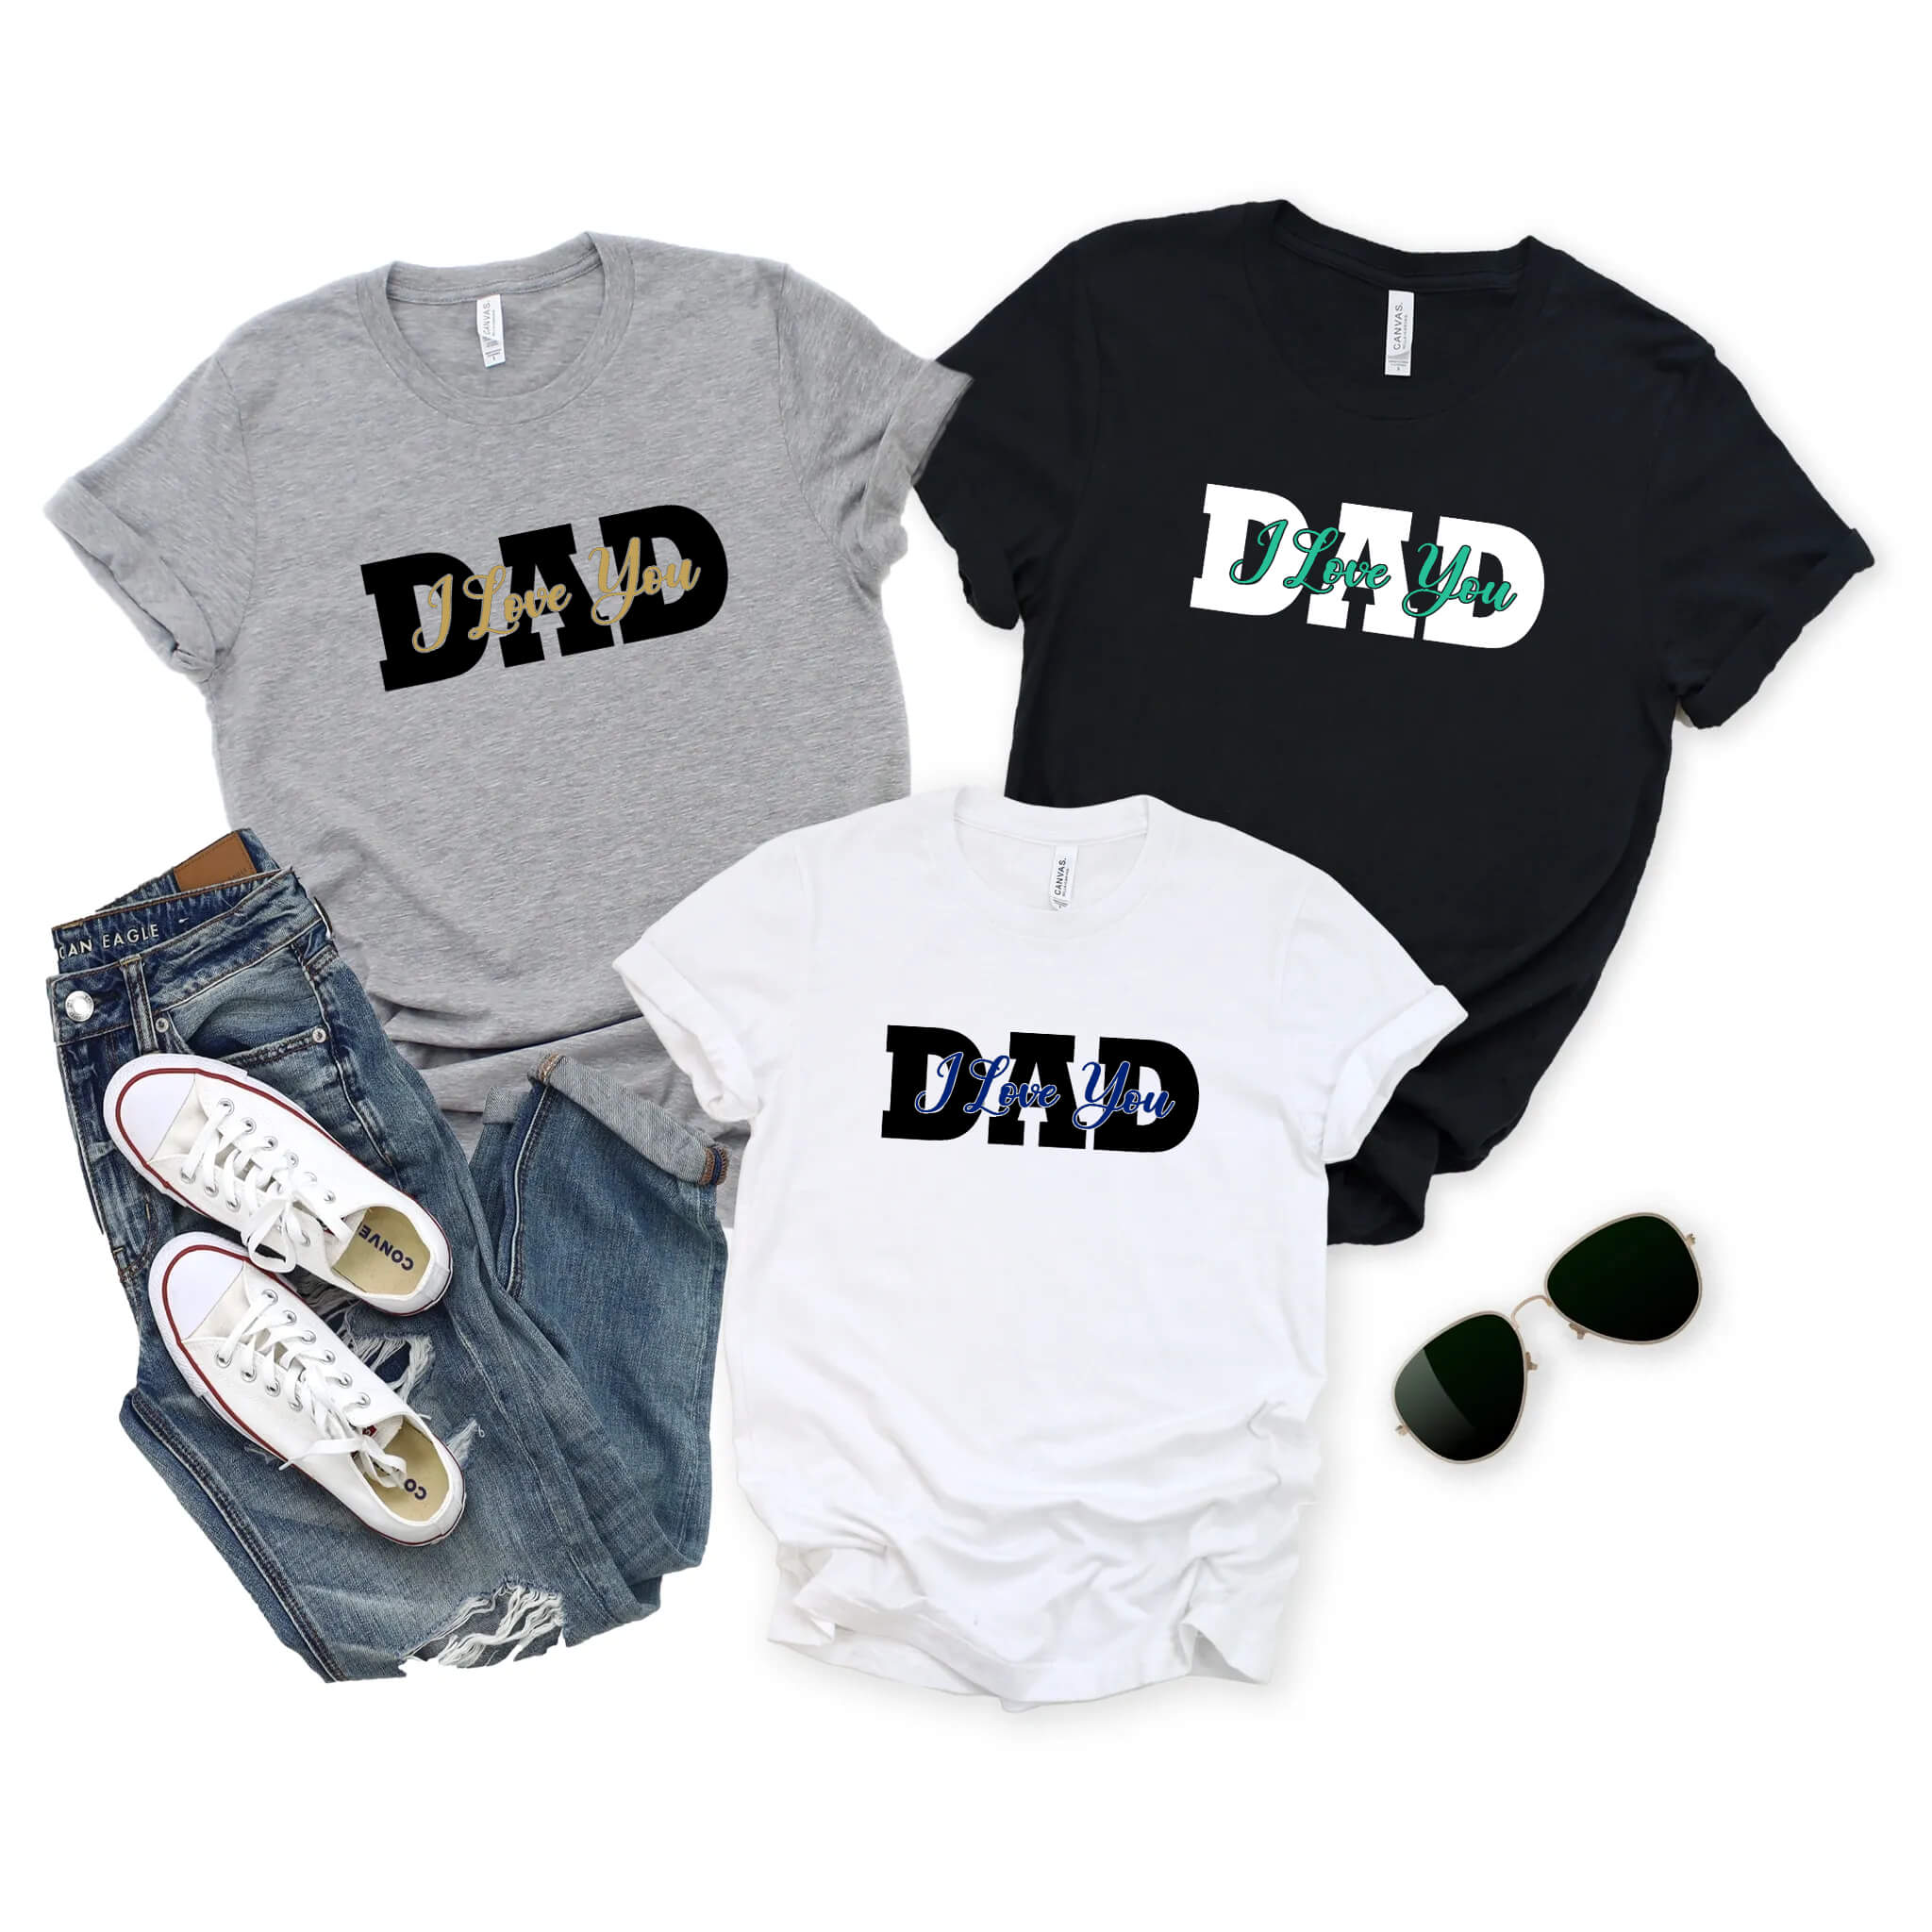 I Love You Dad T-Shirt Guys Mens Birthday Christmas Father's Day Gift